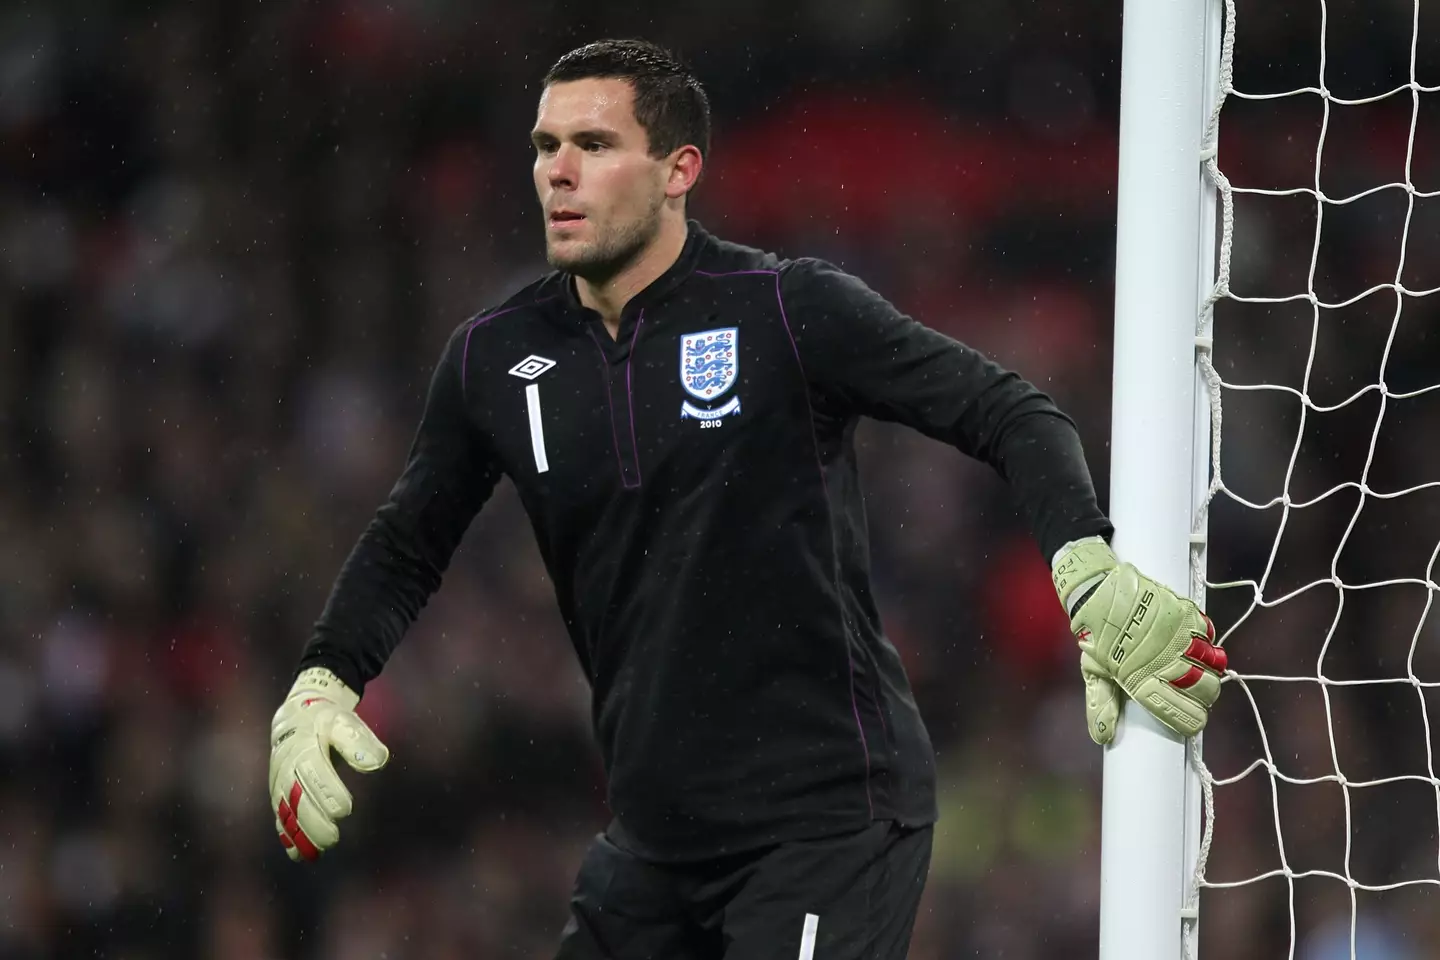 Foster was one of England's keepers during Capello's spell. Image: PA Images